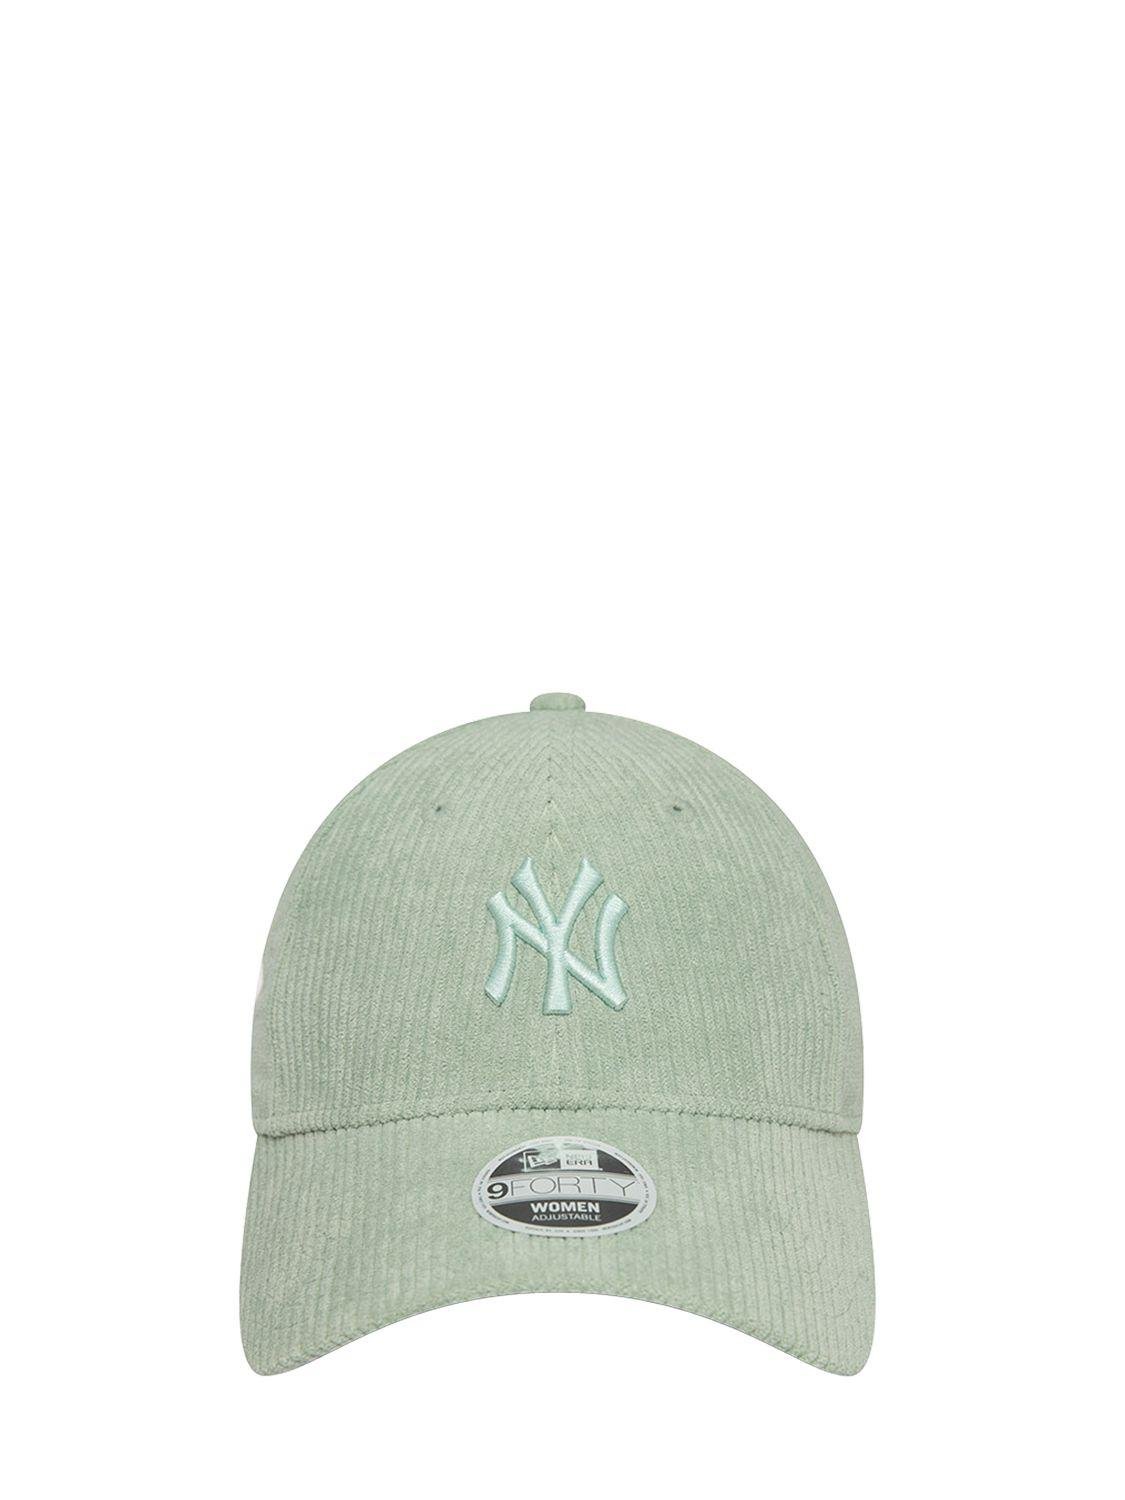 Ny Yankees Female Summer Cord 9forty Hat by NEW ERA